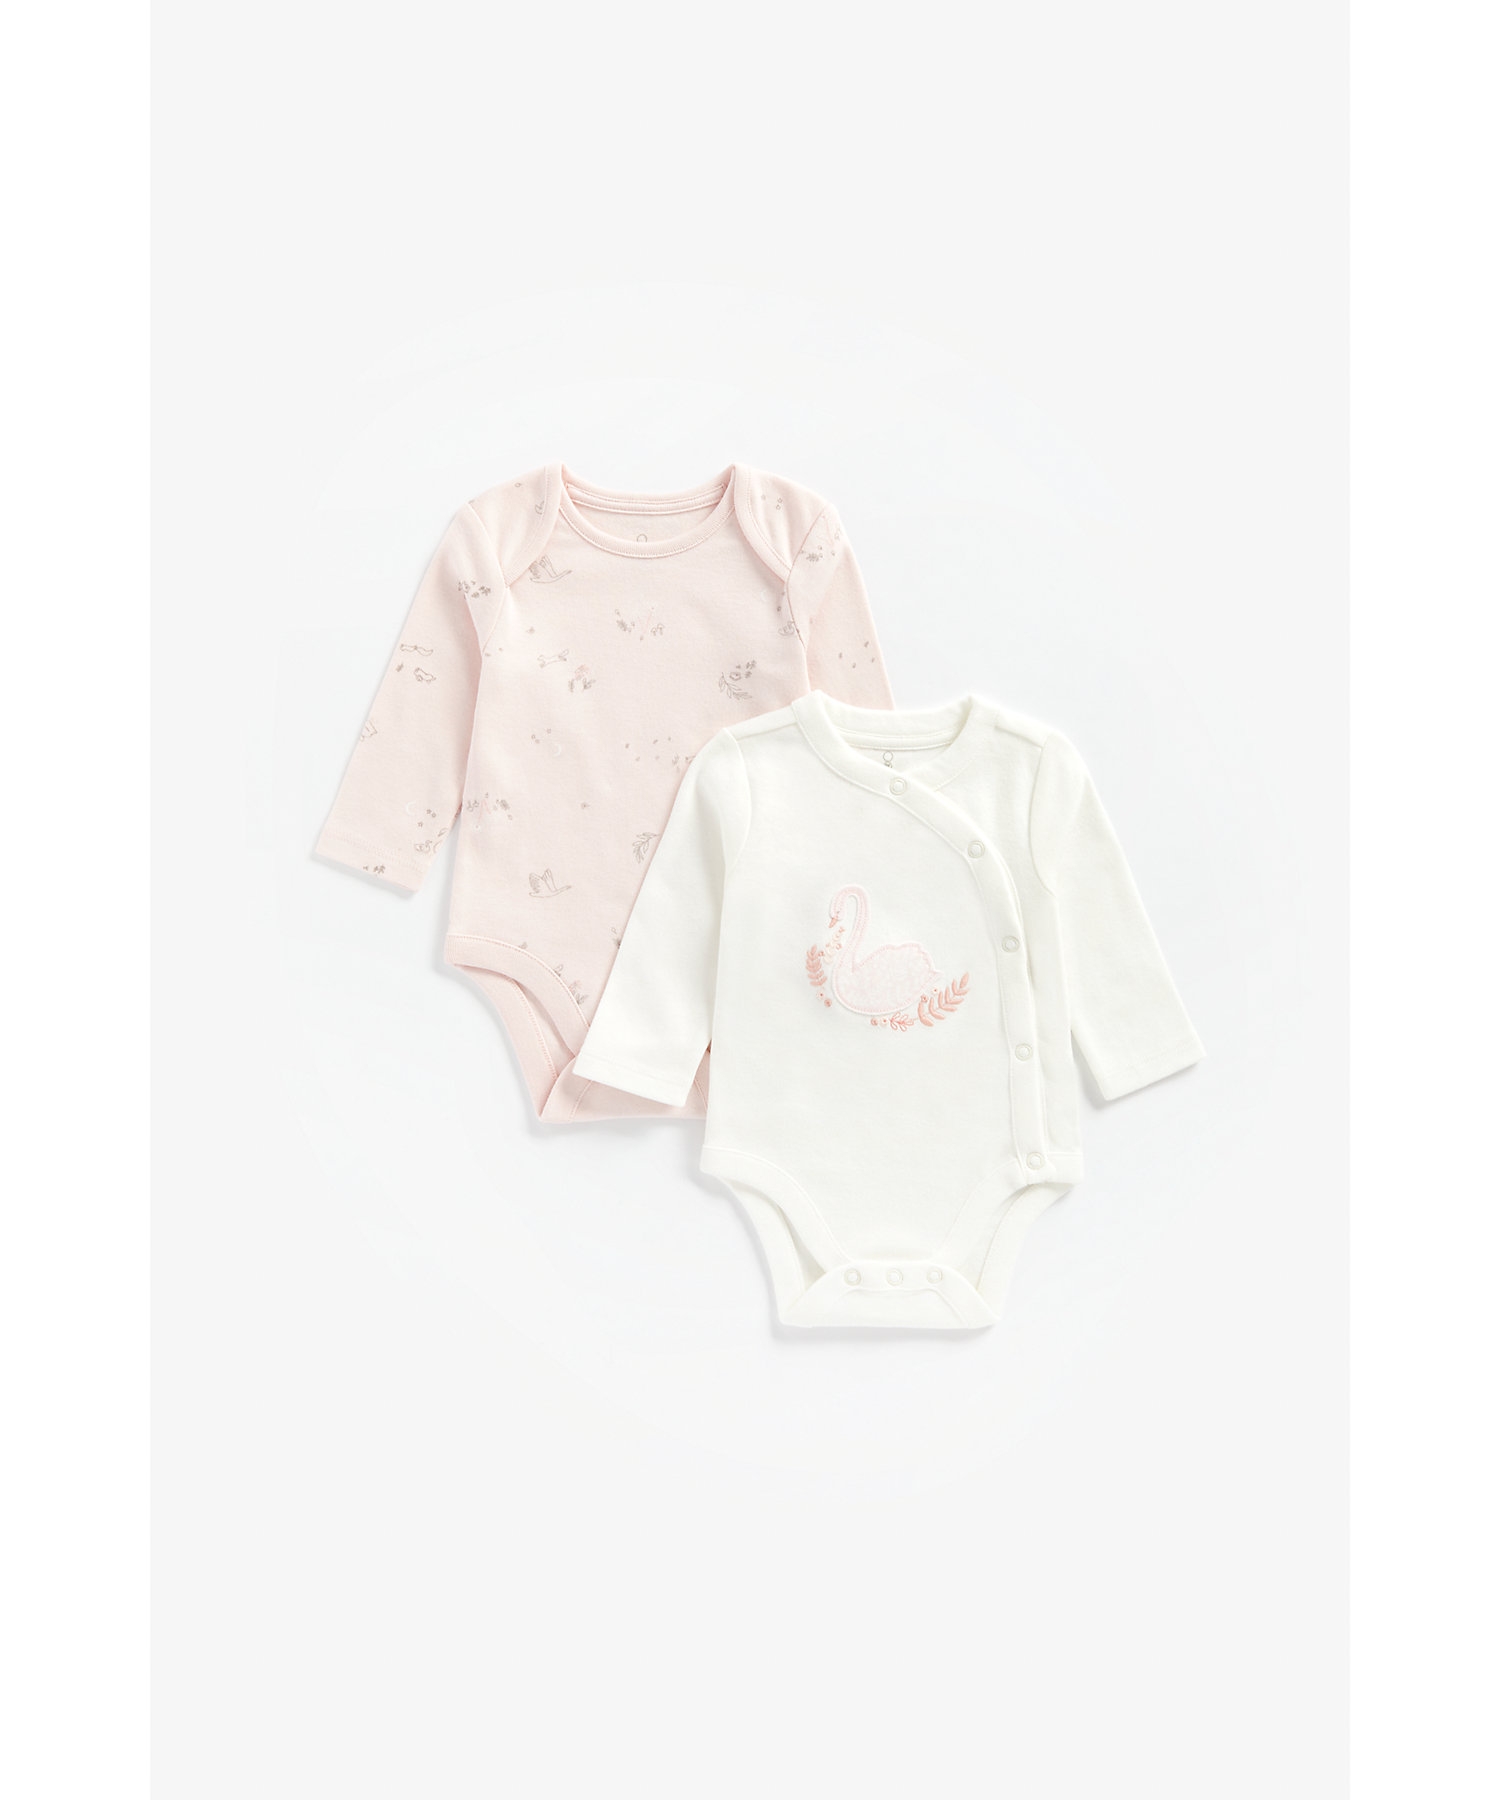 Mothercare | Girls Full Sleeves Bodysuit Swan Patchwork And Embroidery - Pack Of 2 - Pink